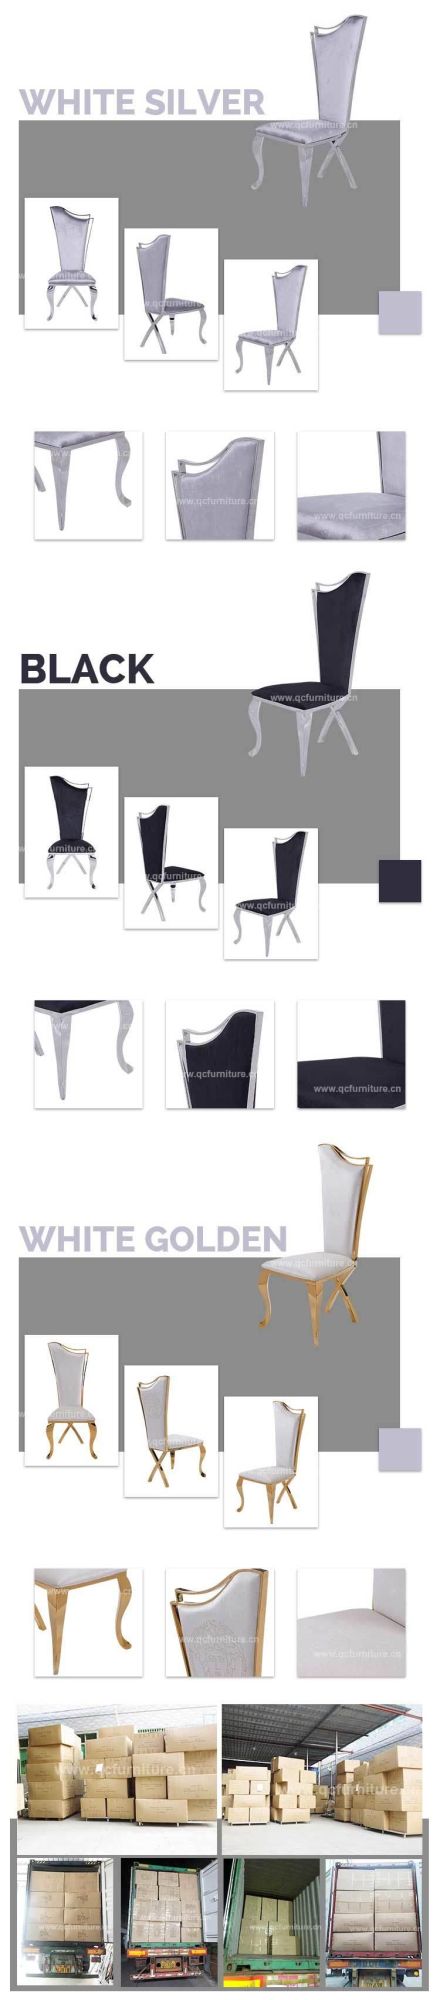 Modern Golden Stainless Steel Farme Dining Chairs for Home